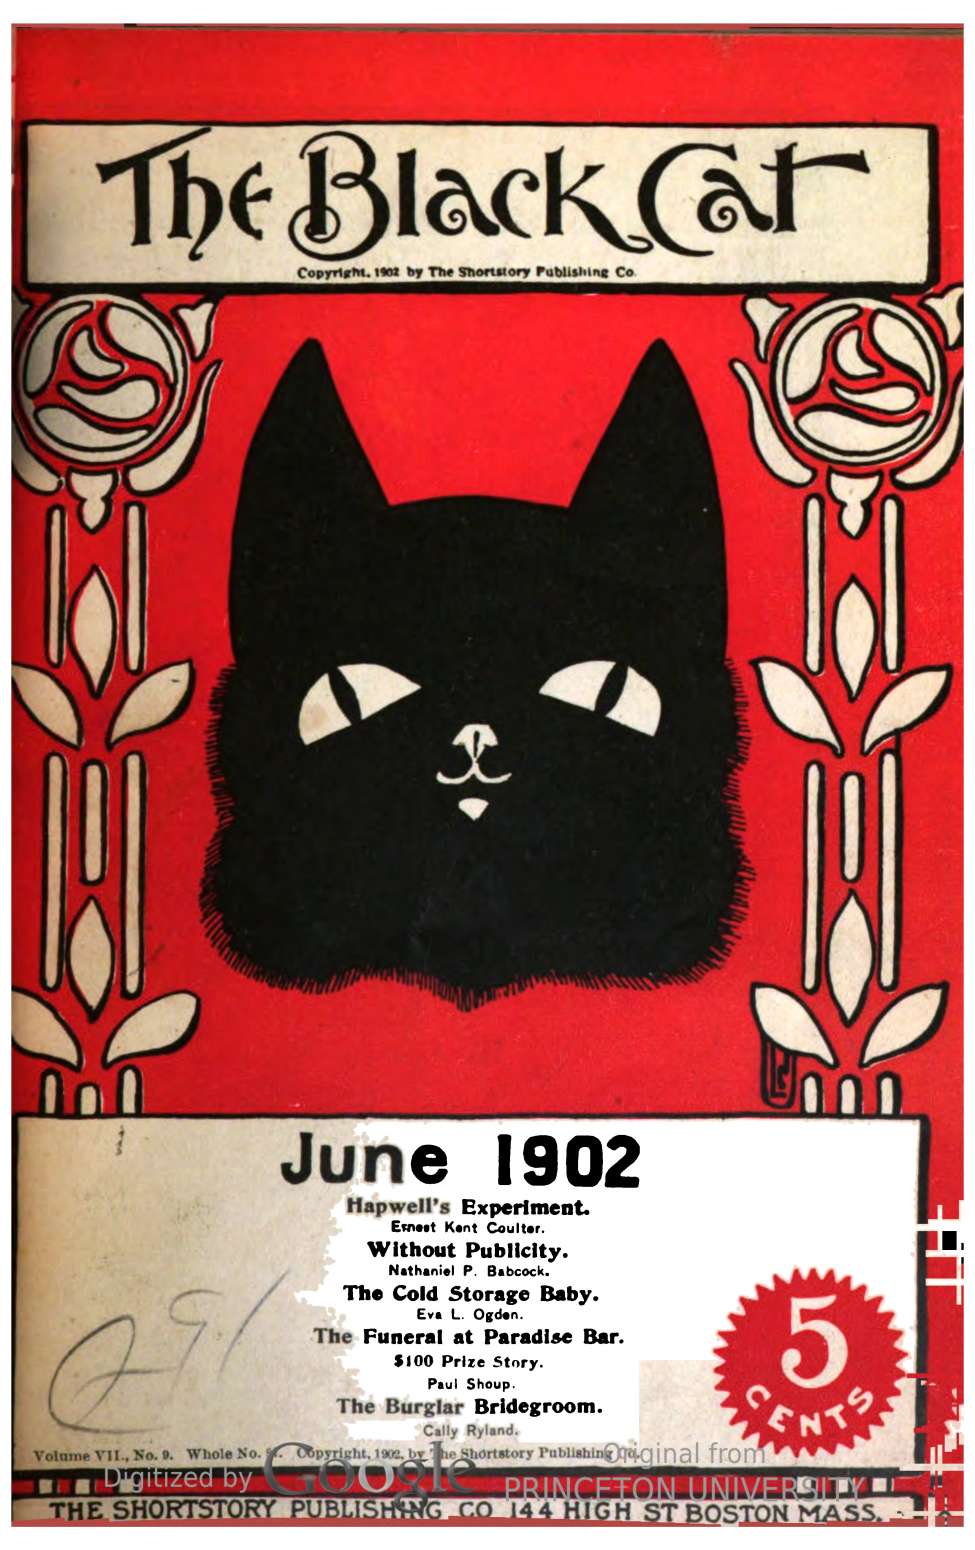 Book Cover For The Black Cat v7 9 - Hapwell’s Experiment - Ernest Kent Coulter